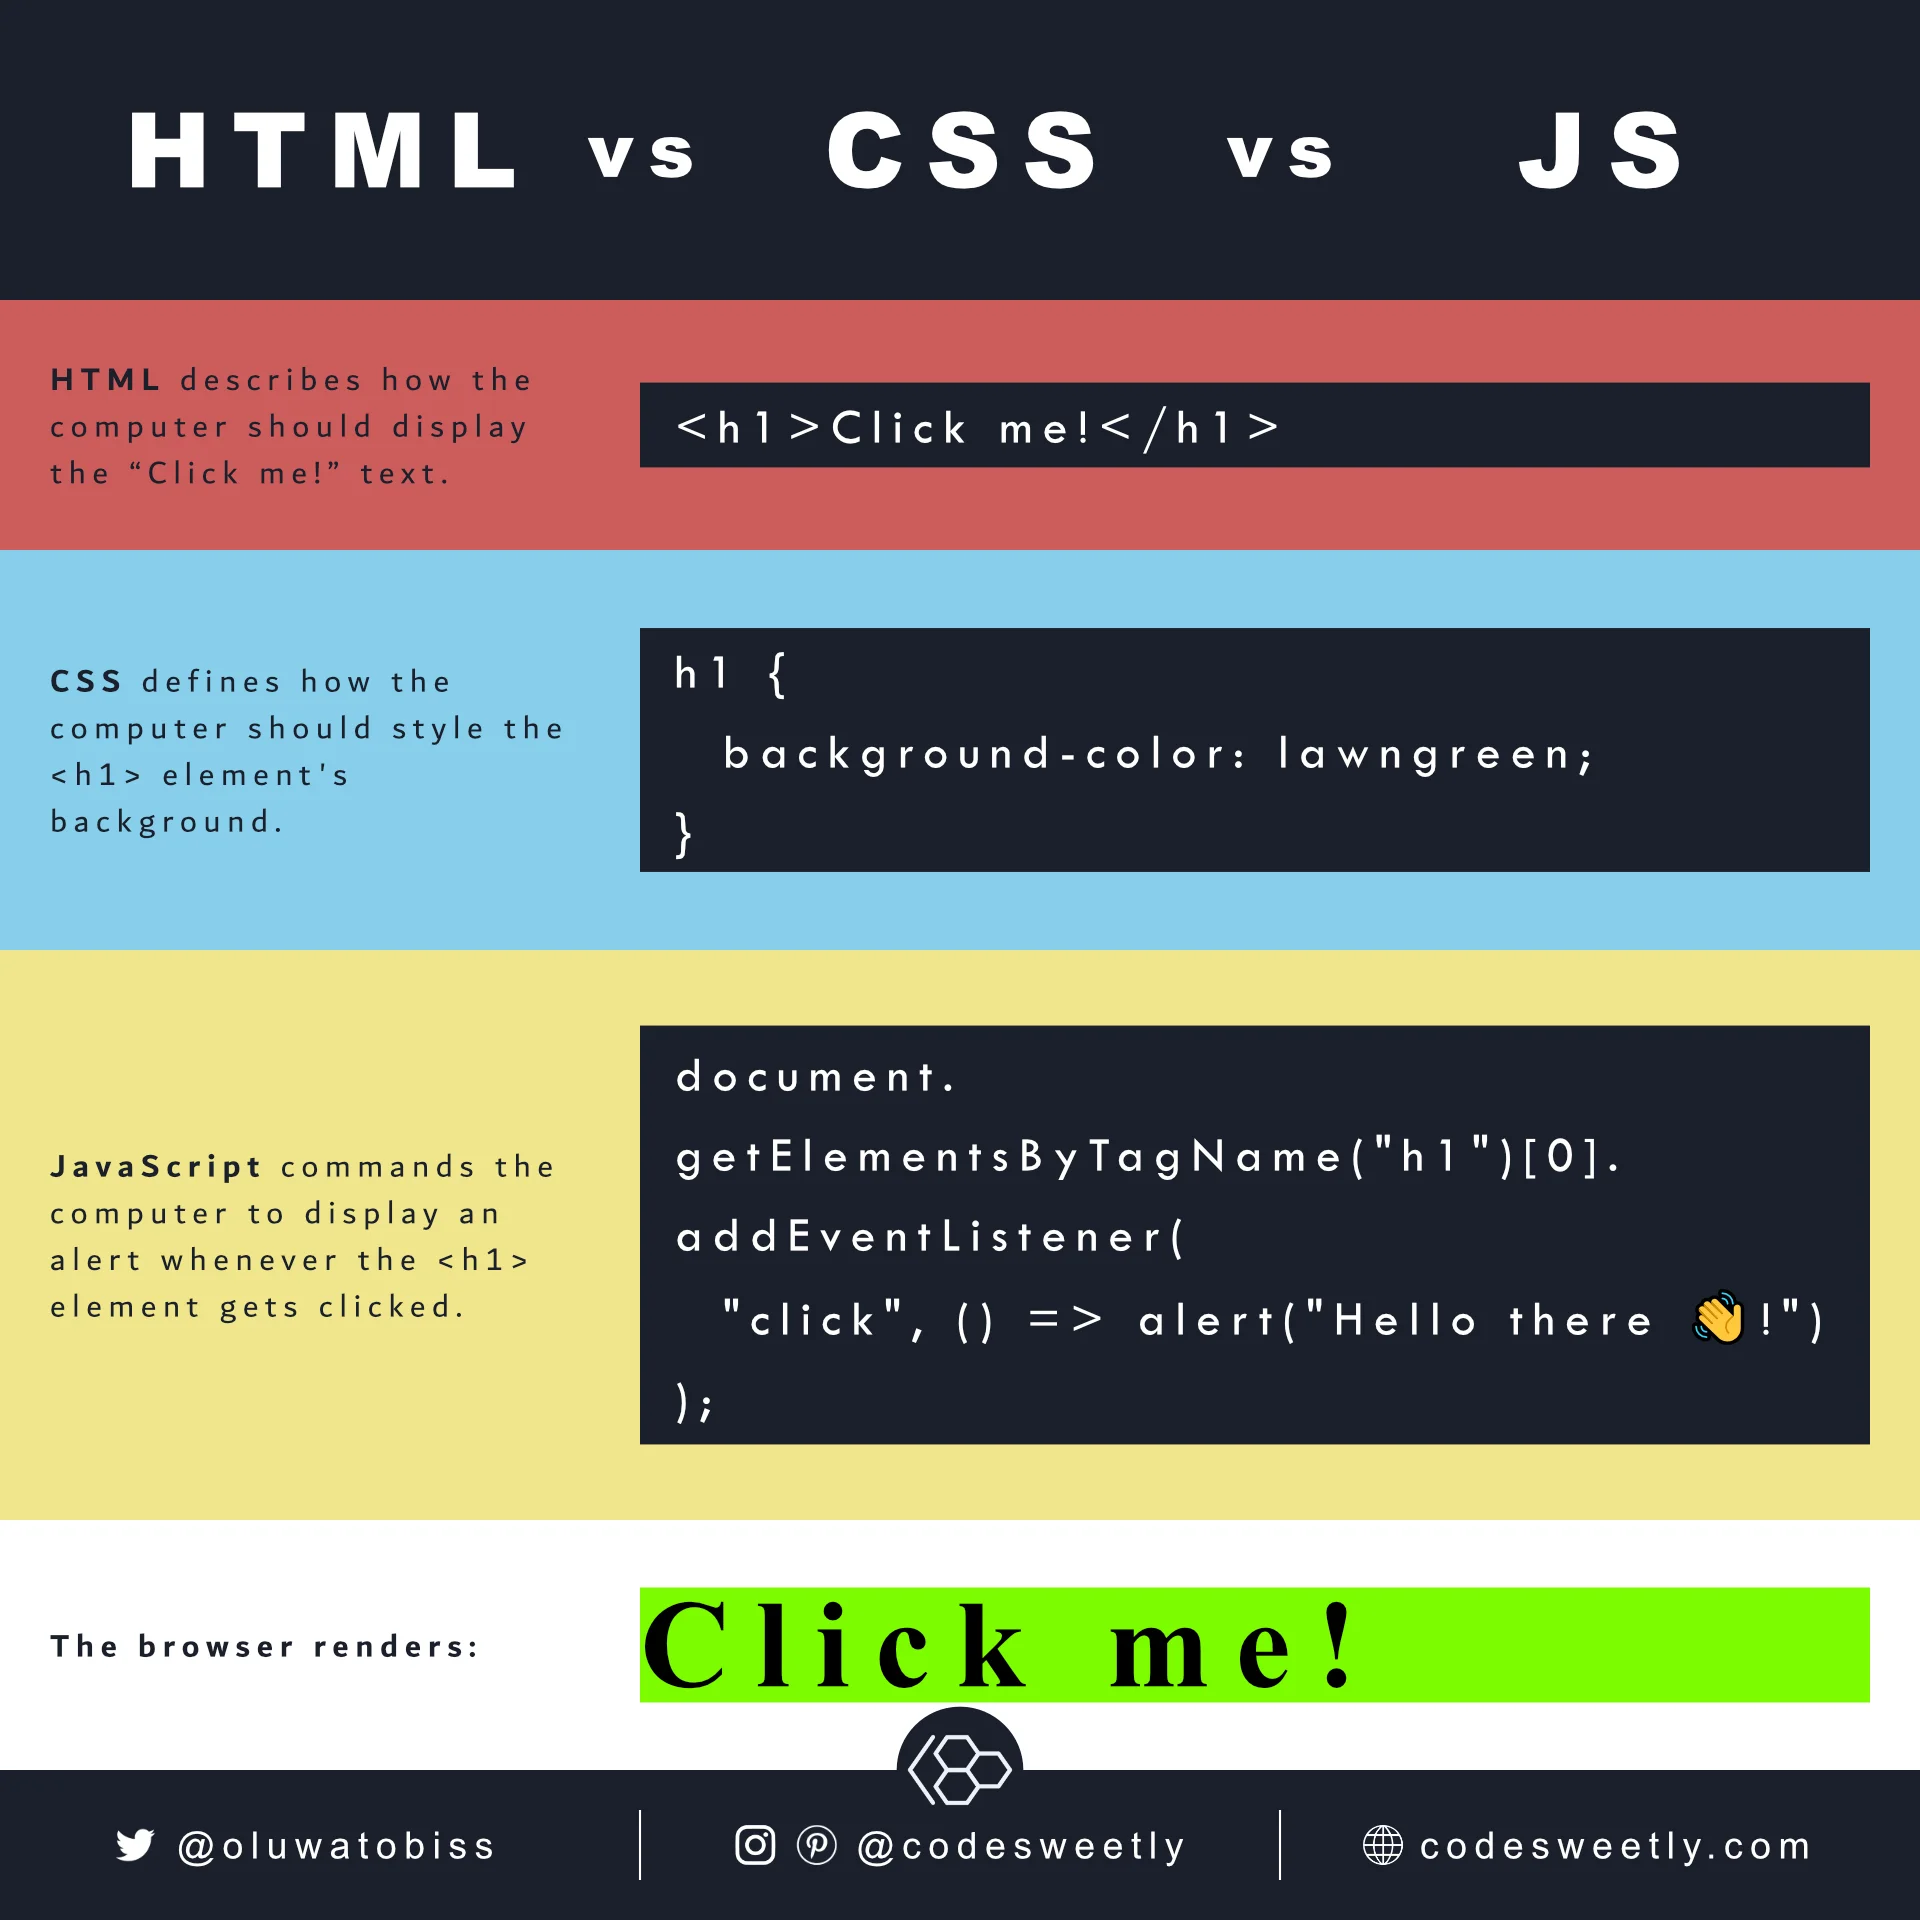 HTML annotates content. CSS defines an element's style. JavaScript programs an item's actions.